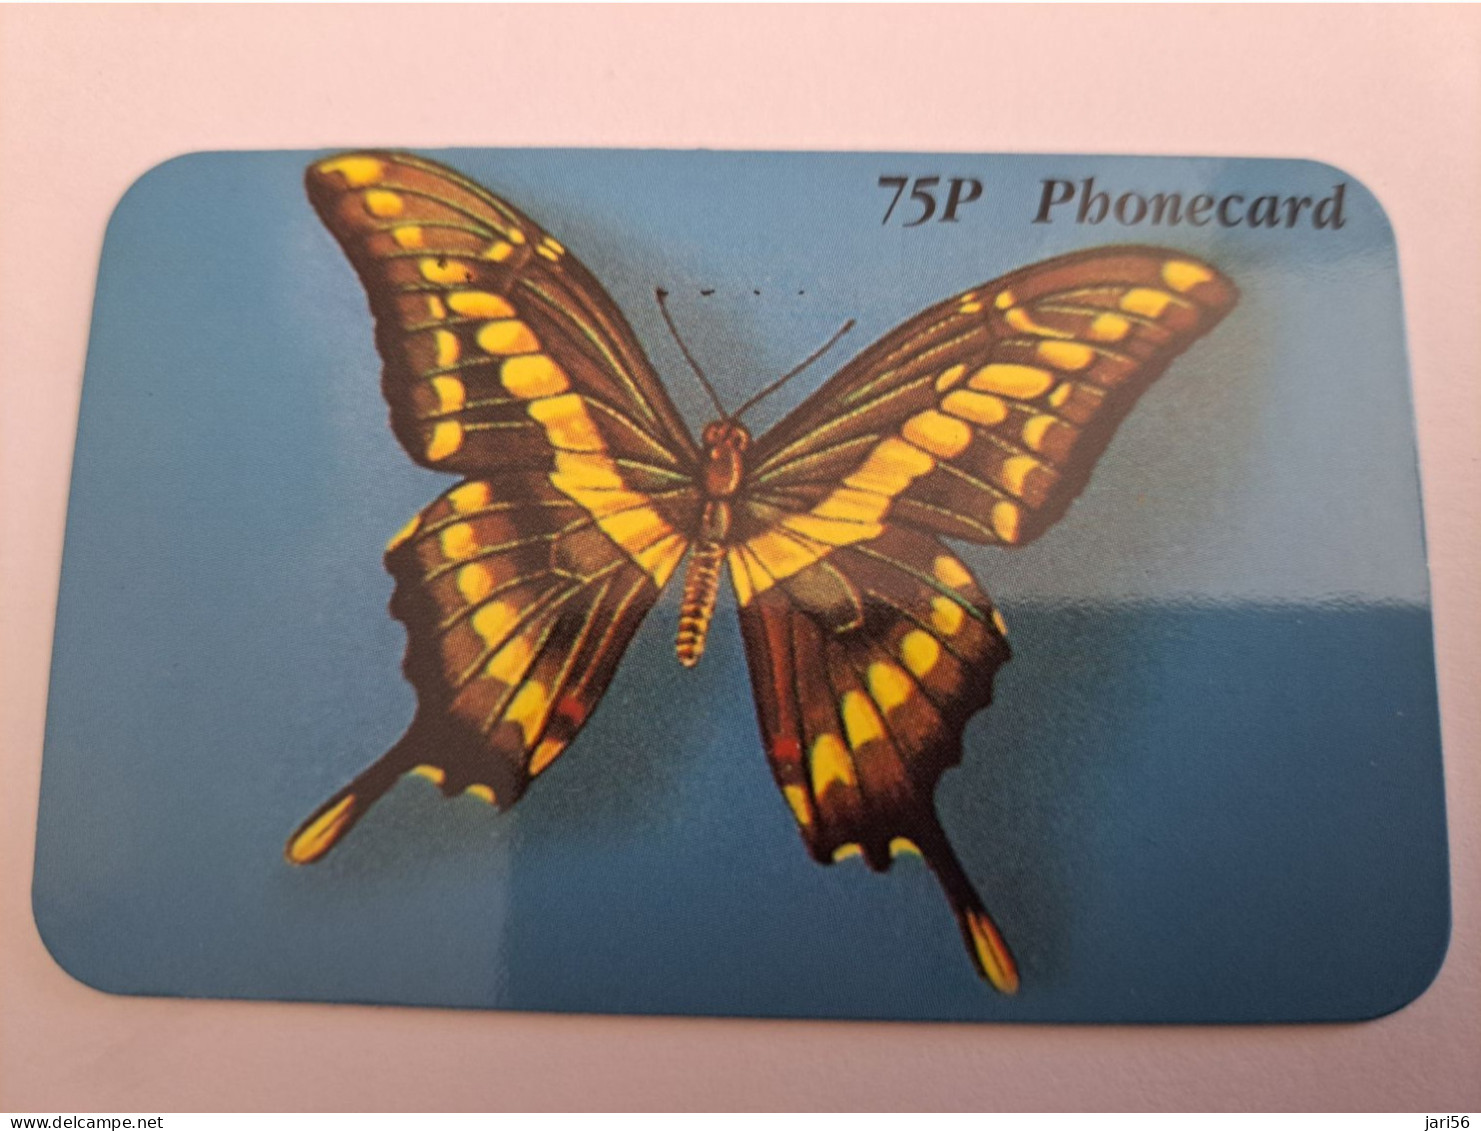 GREAT BRITAIN  / DISCOUNT PHONECARD/BUTTERFLY / 75 PENCE    PREPAID CARD / MINT      **13588** - Collections